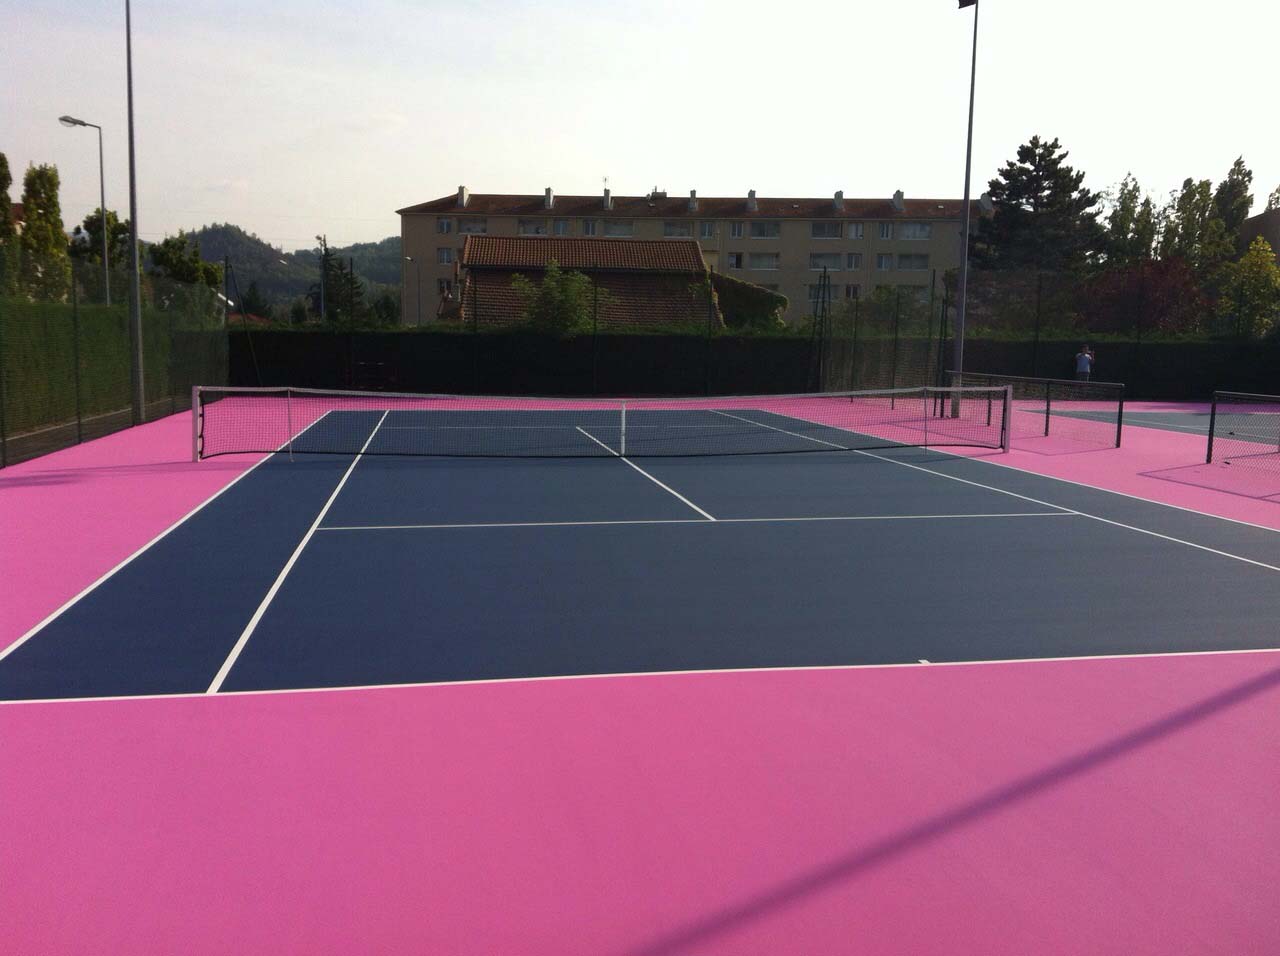 Soft Tennis Courts: A Perfect Blend of Comfort and Skill